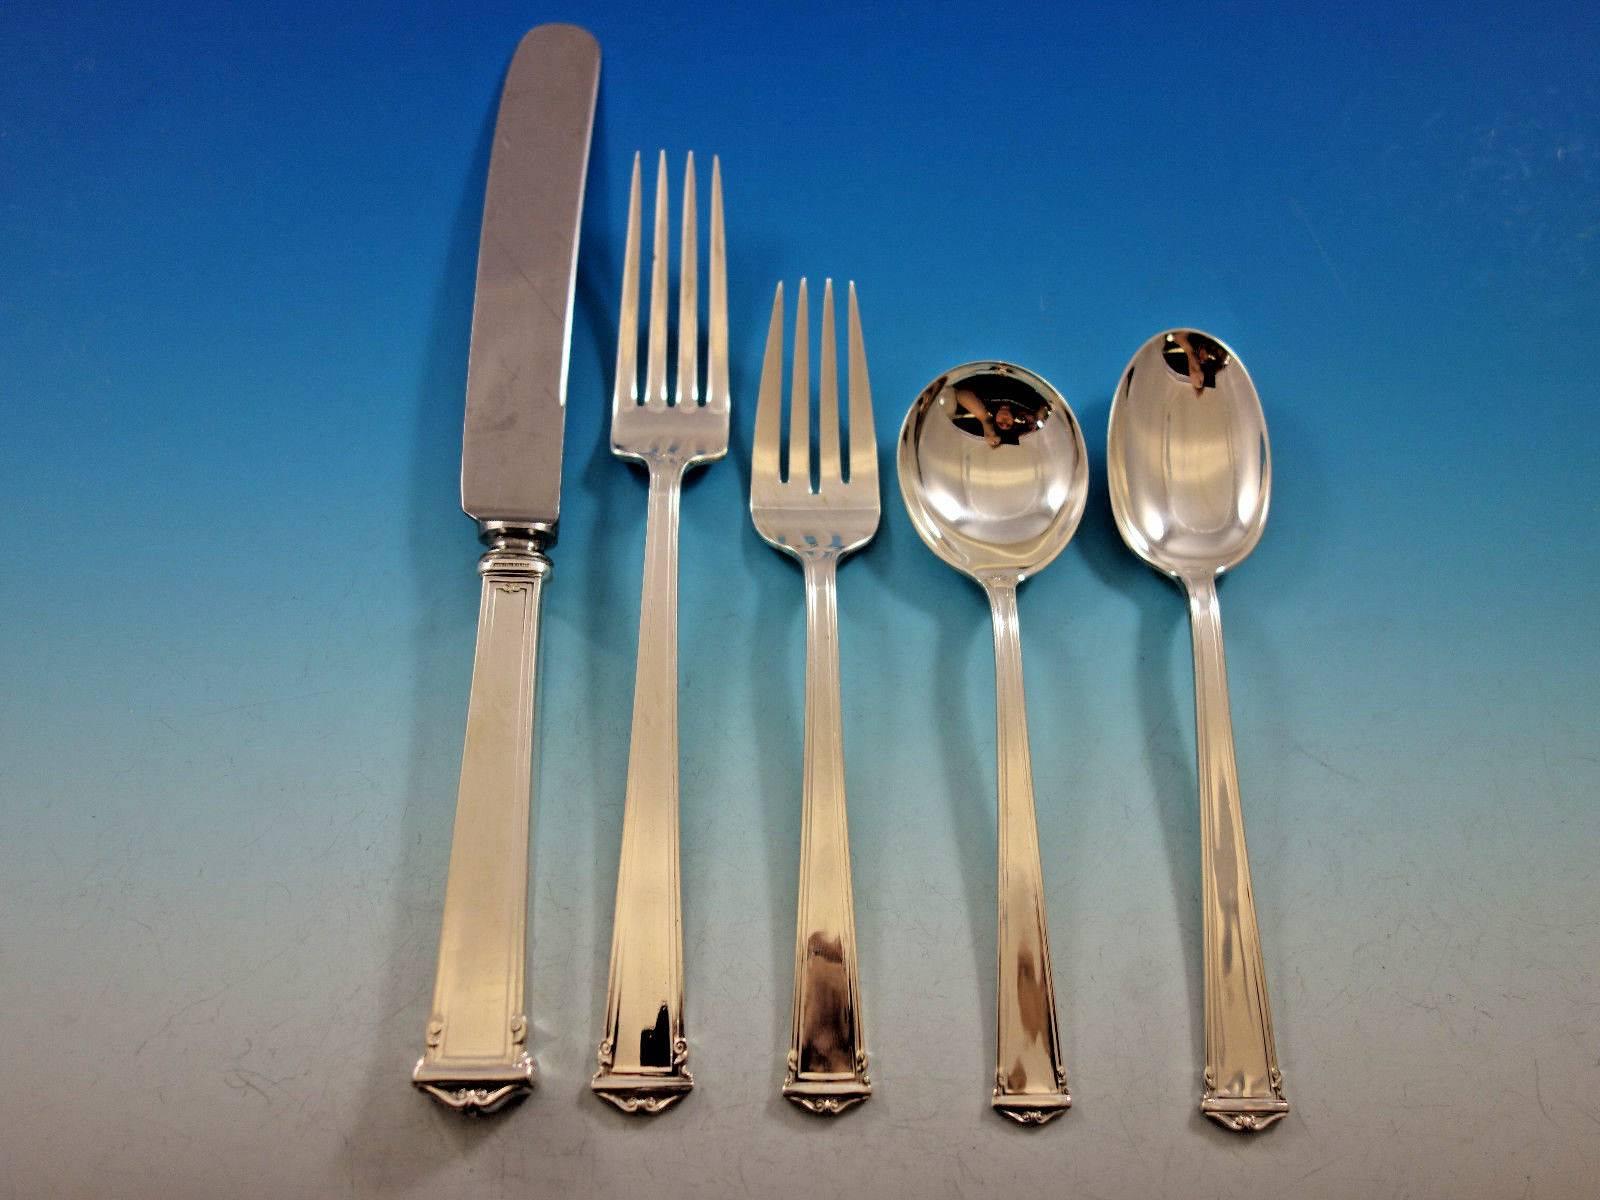 Theseum by International sterling silver flatware set of 33 pieces. Great starter set! This set includes: 

Six knives, 9 1/8